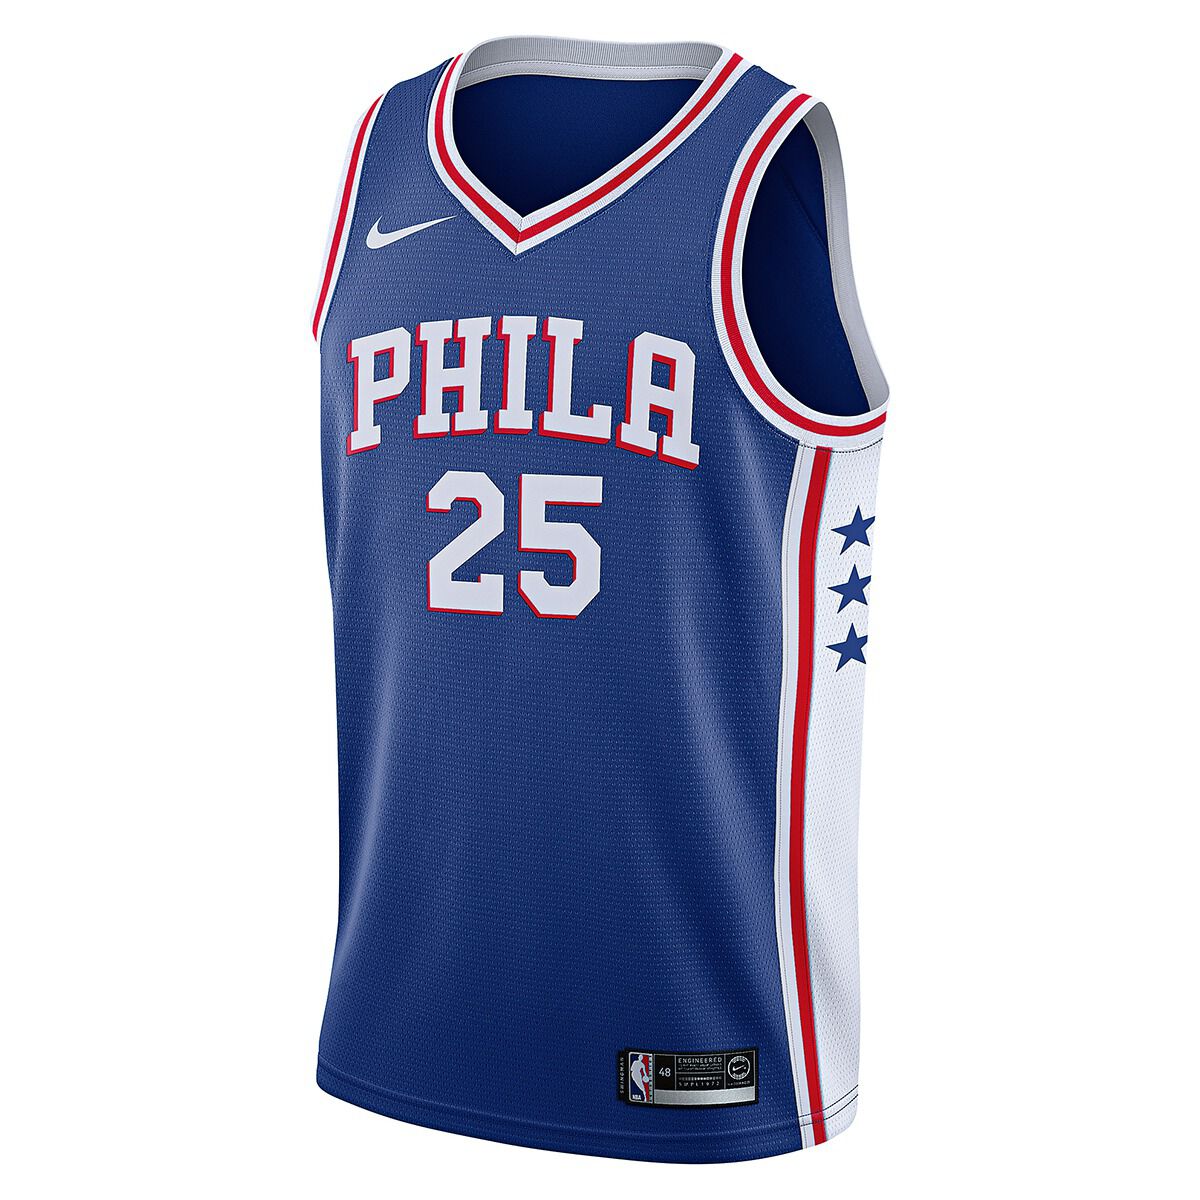 simmons jersey